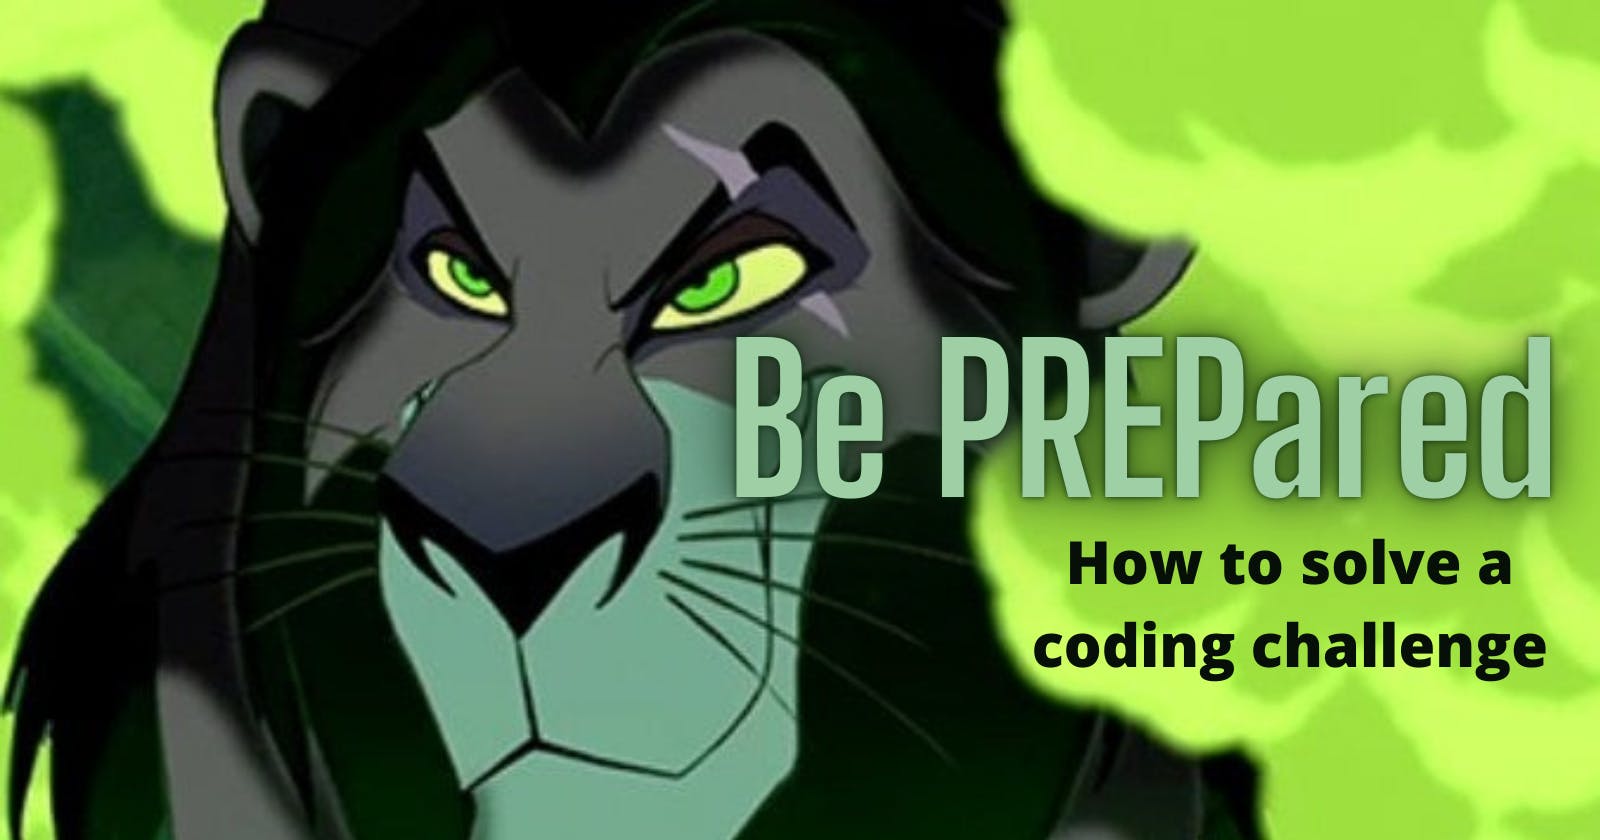 How to Solve a Coding Challenge